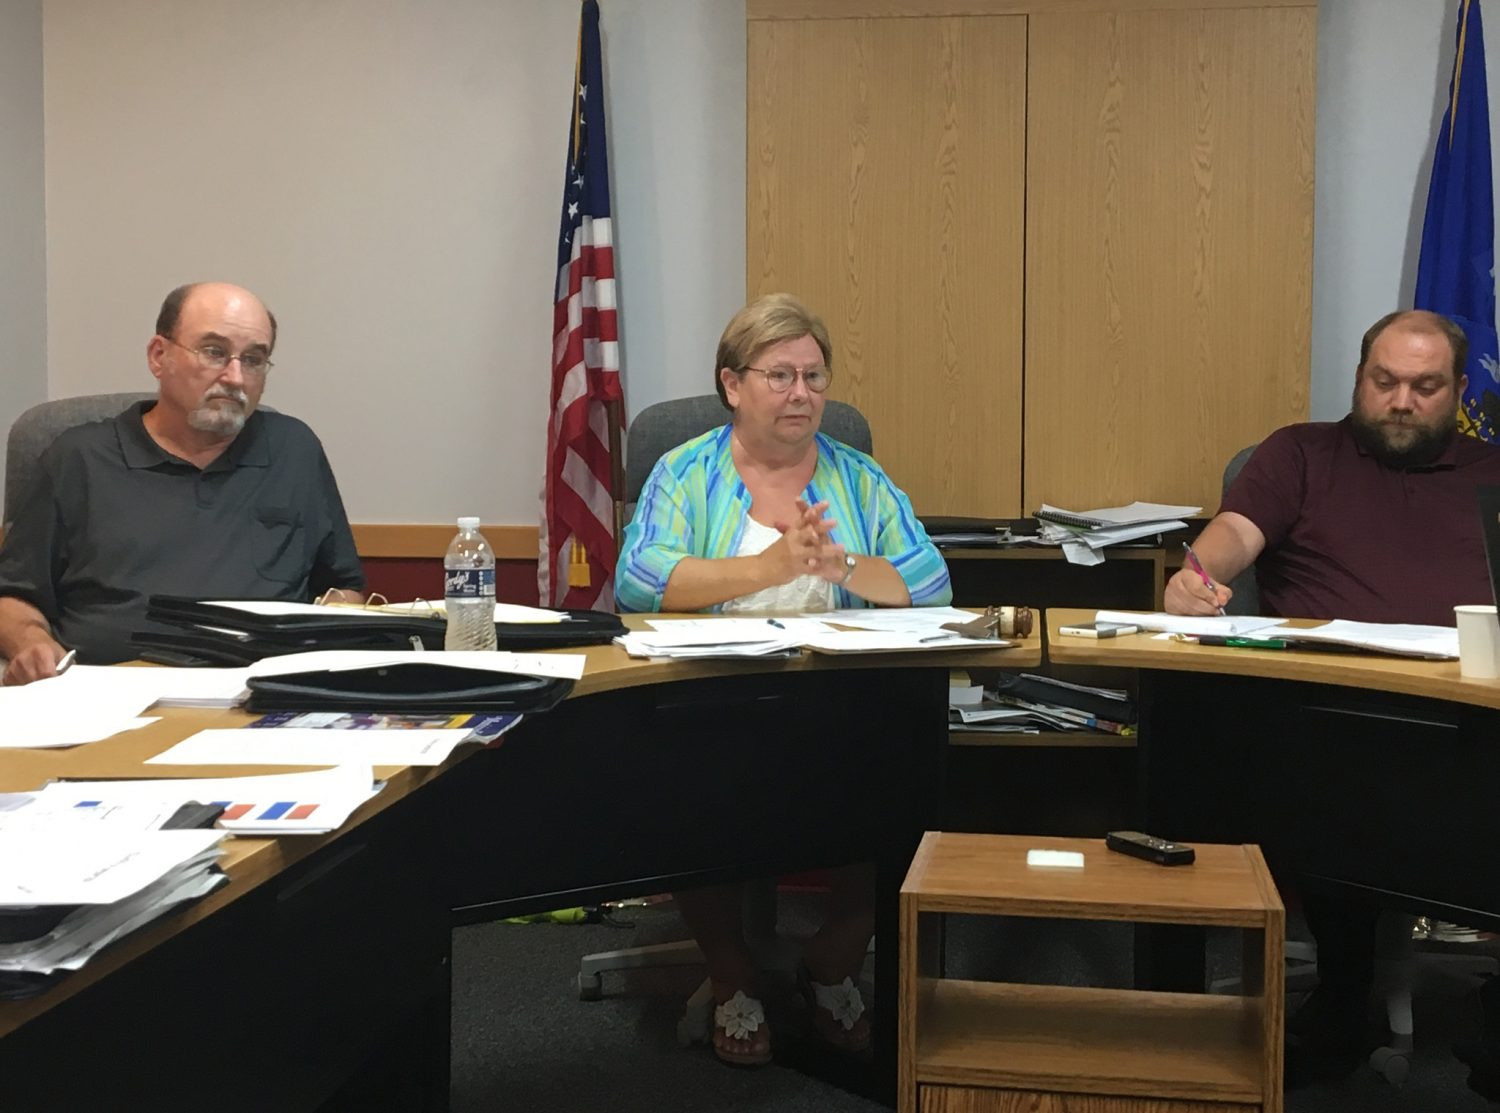 From left: Spencer Village Trustee Harry Toufar, President Pauline Frome, and Clerk Paul Hensch listen to discussion on the proposed ATV ordinance at a June 12 meeting.